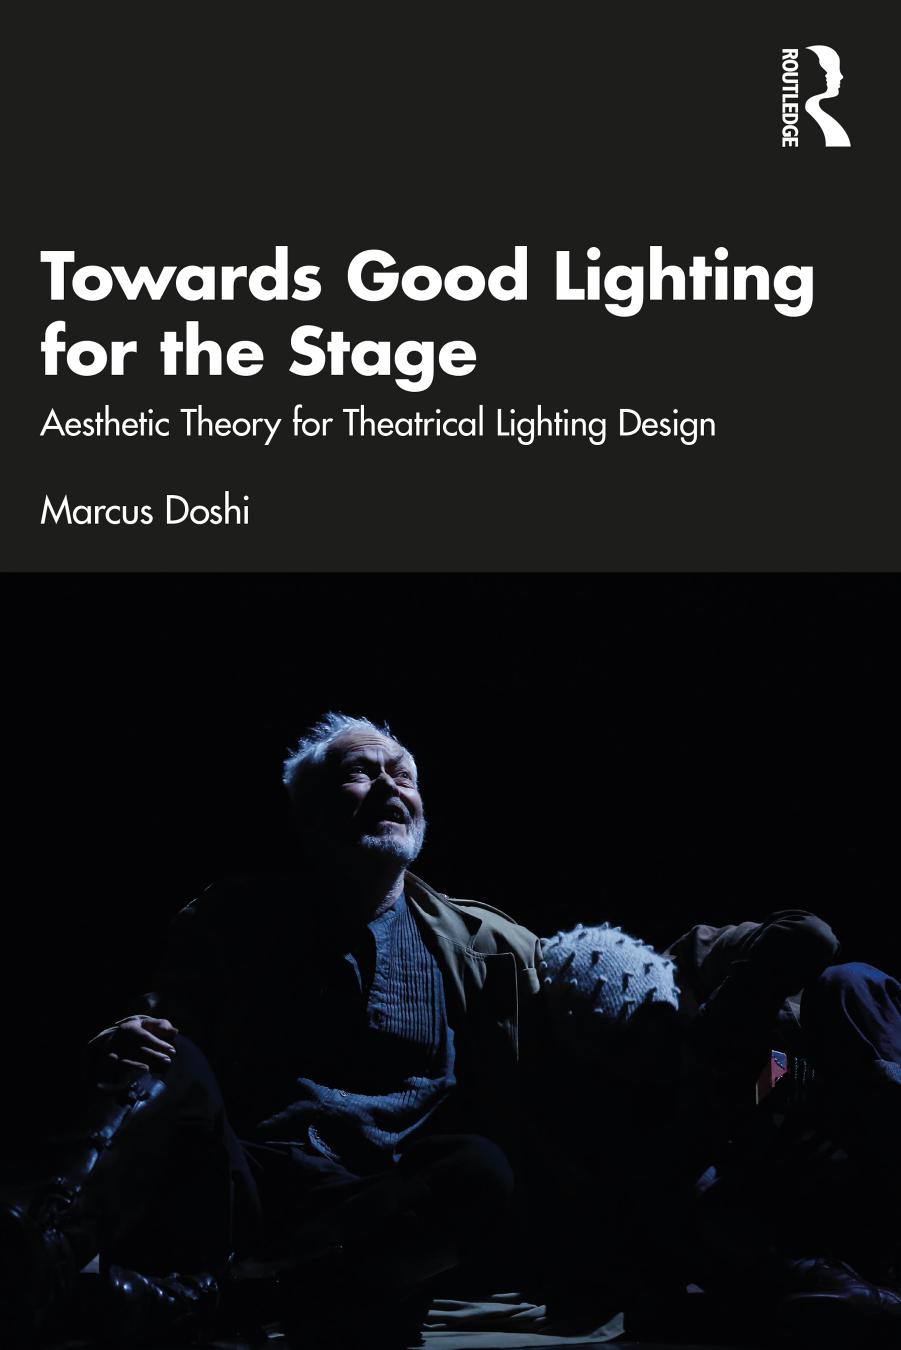 Towards Good Lighting for the Stage: Aesthetic Theory for Theatrical Lighting Design by Marcus Doshi